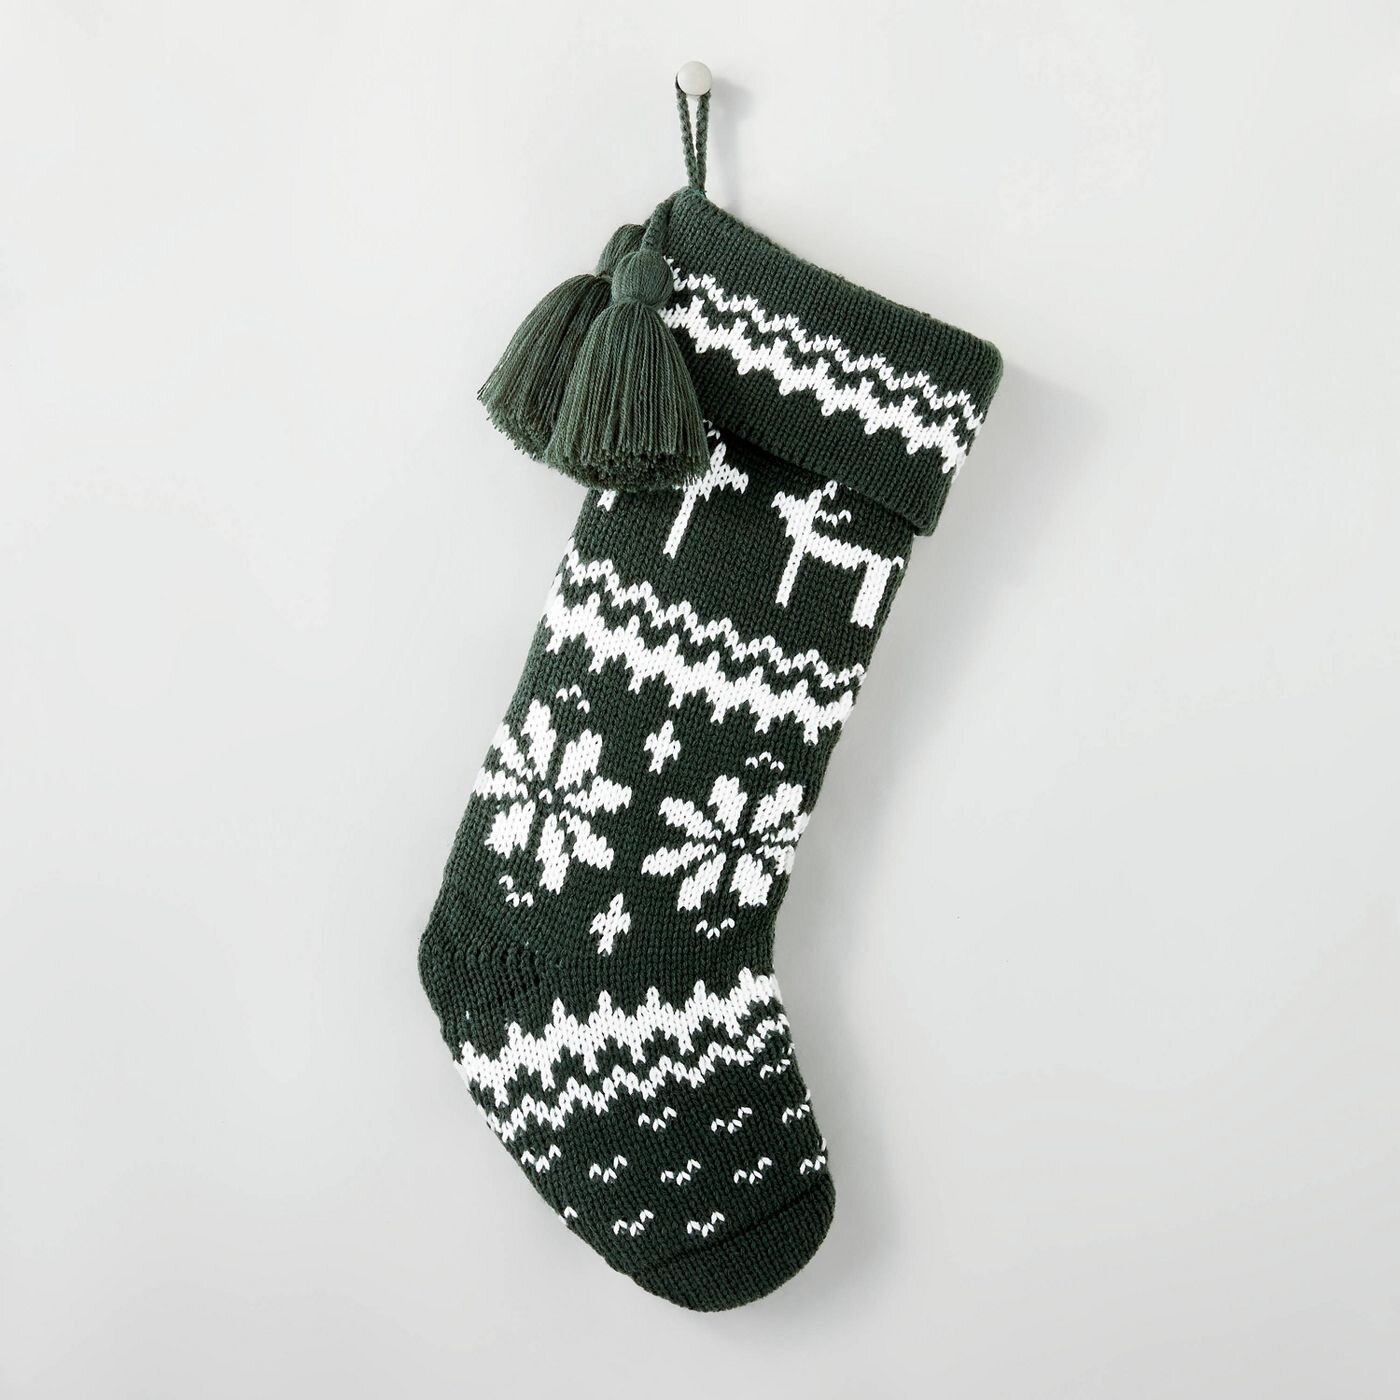 Fair Isle Knit Holiday Stocking with Swing Tassels Green - Hearth & Hand™ with Magnolia.jpg